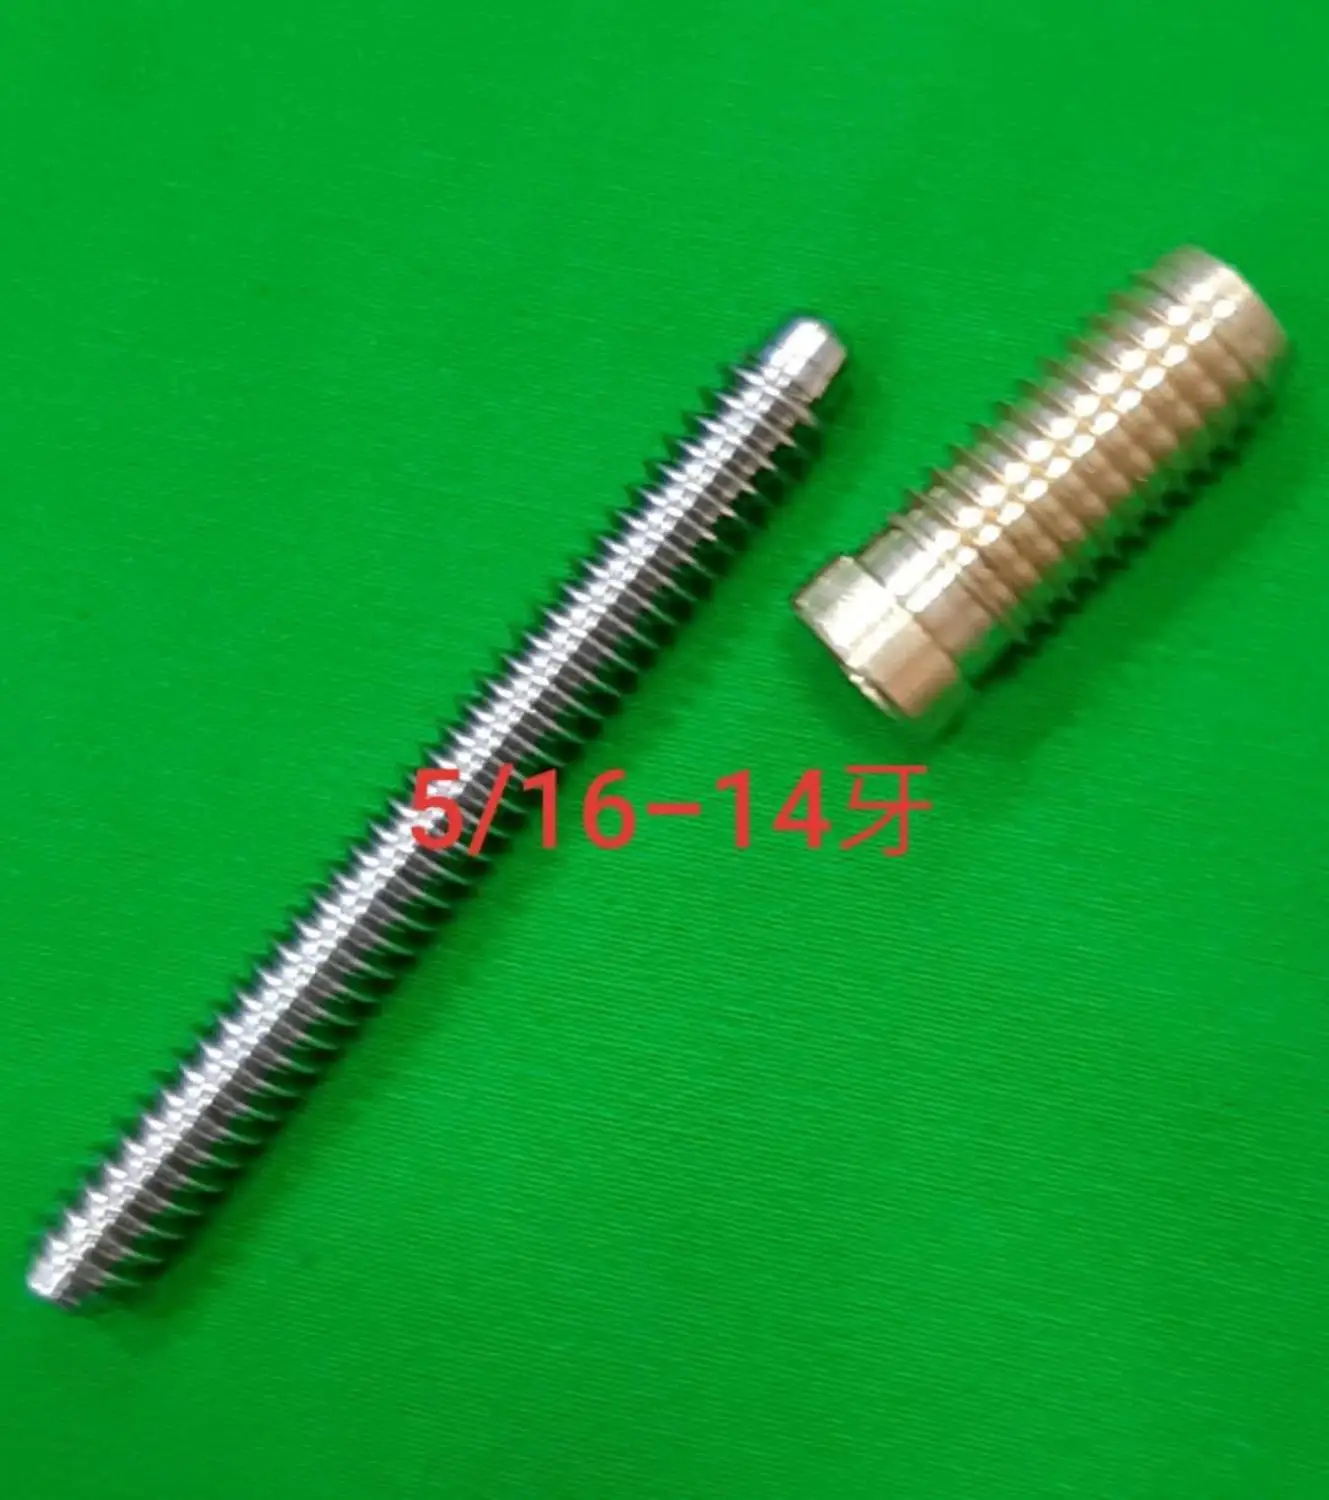 Pin & Insert 5/16-14 Pool Cue Joint Pin & 5/16-14 S/A Brass Cue Shaft Insert 